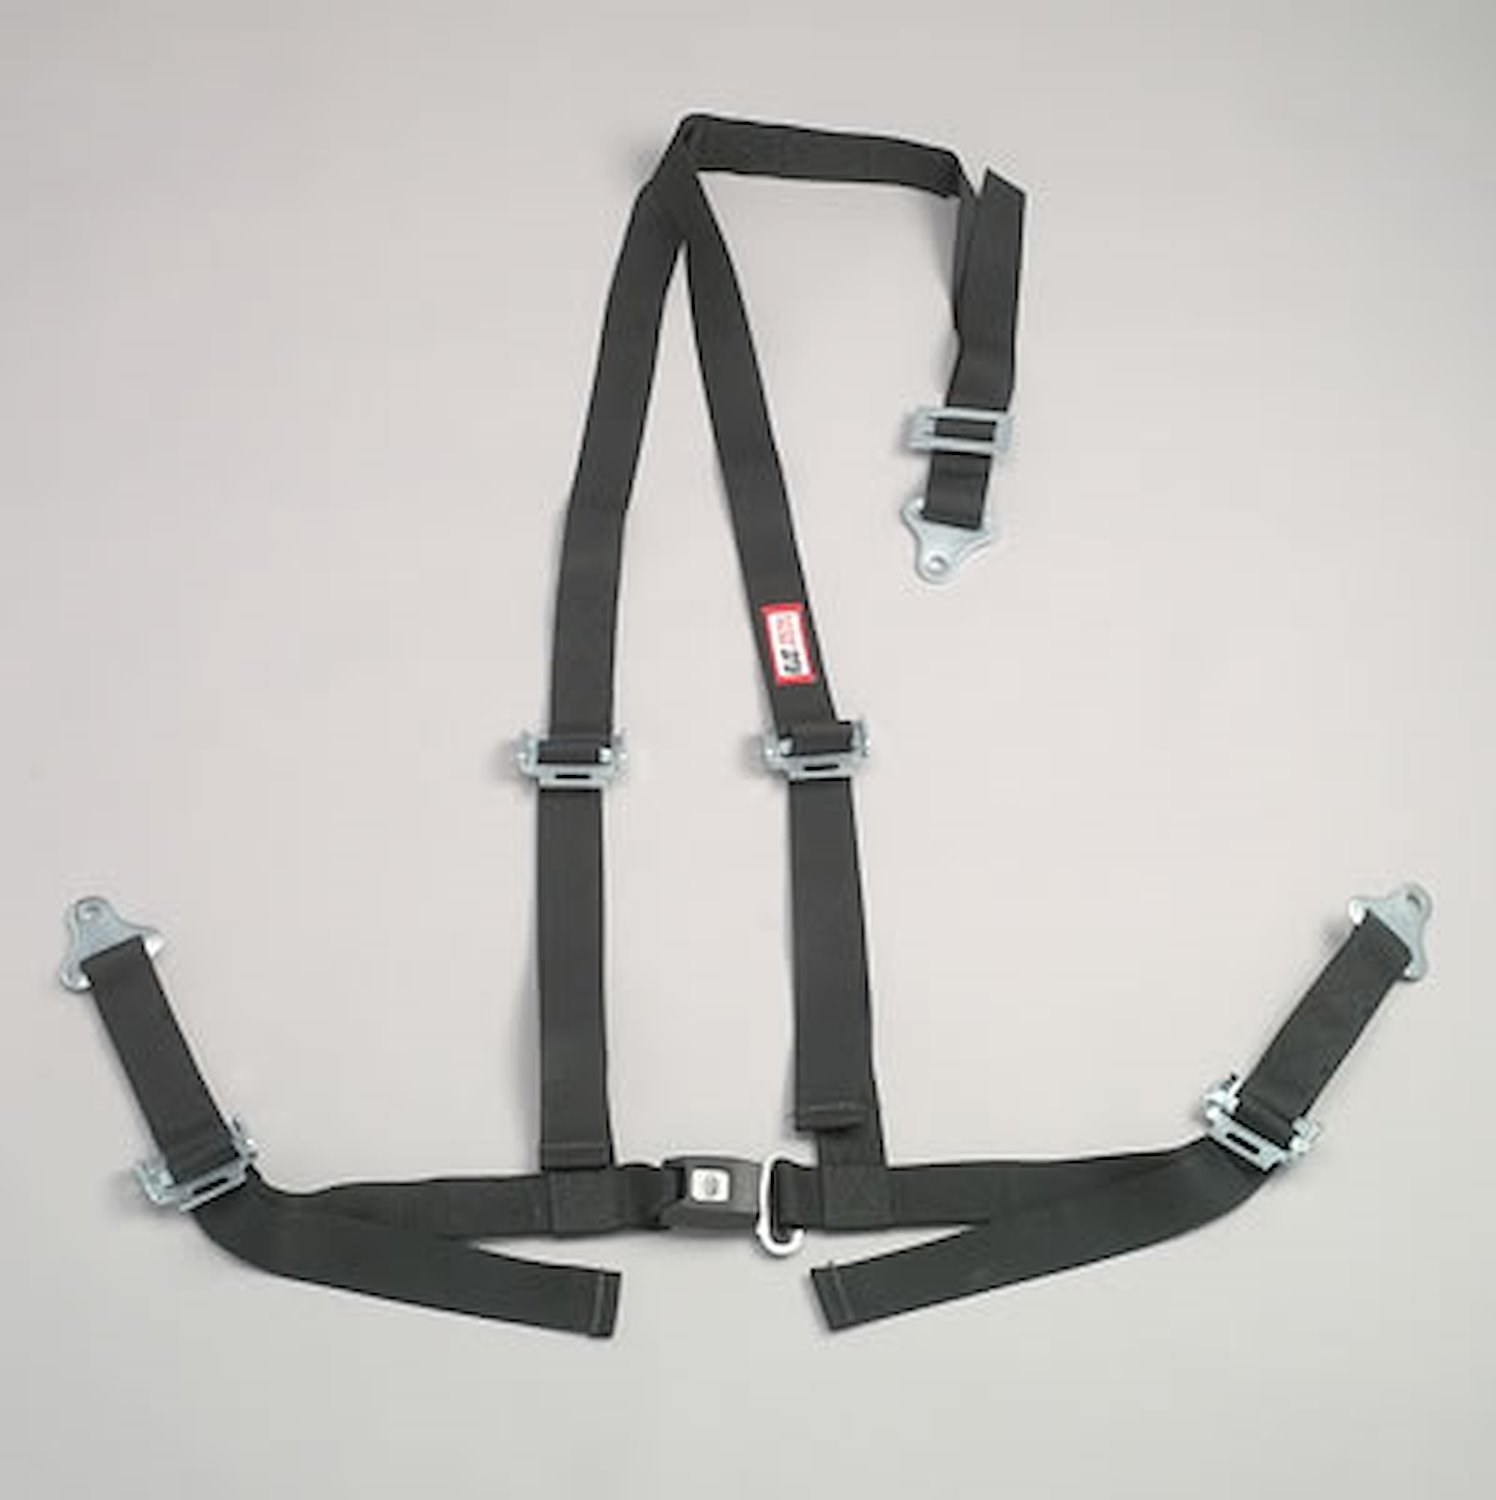 NON-SFI B&T HARNESS 2 PULL DOWN Lap Belt BOLT 2 S. H. Individual FLOOR Mount WRAP/BOLT w/STERNUM STRAP RED